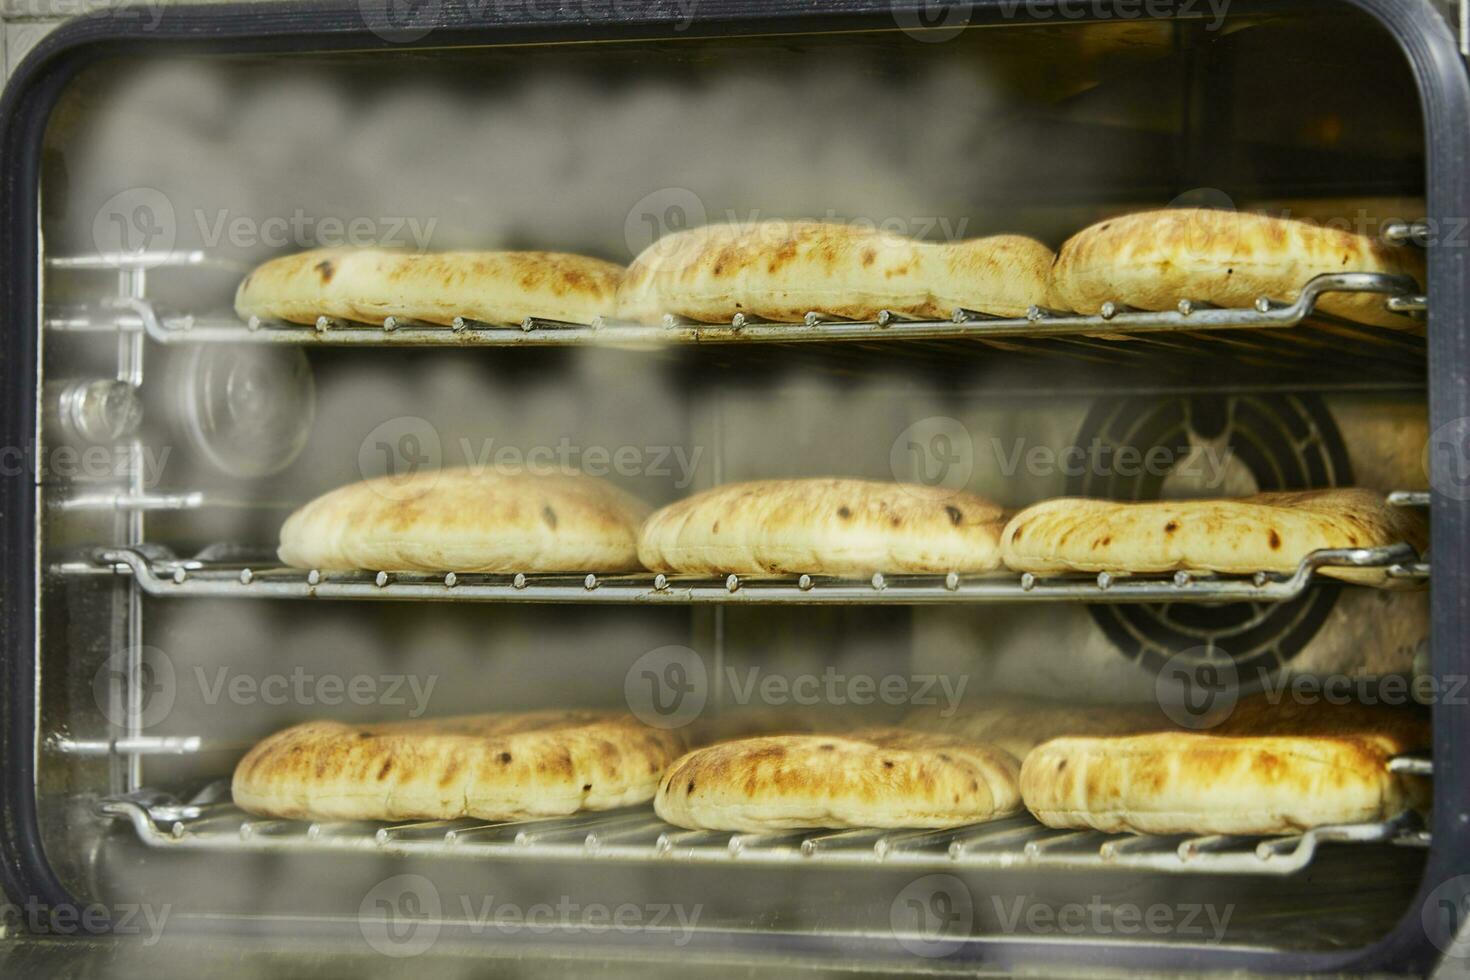 Pitas in the oven with steam, after baking in an electric oven photo